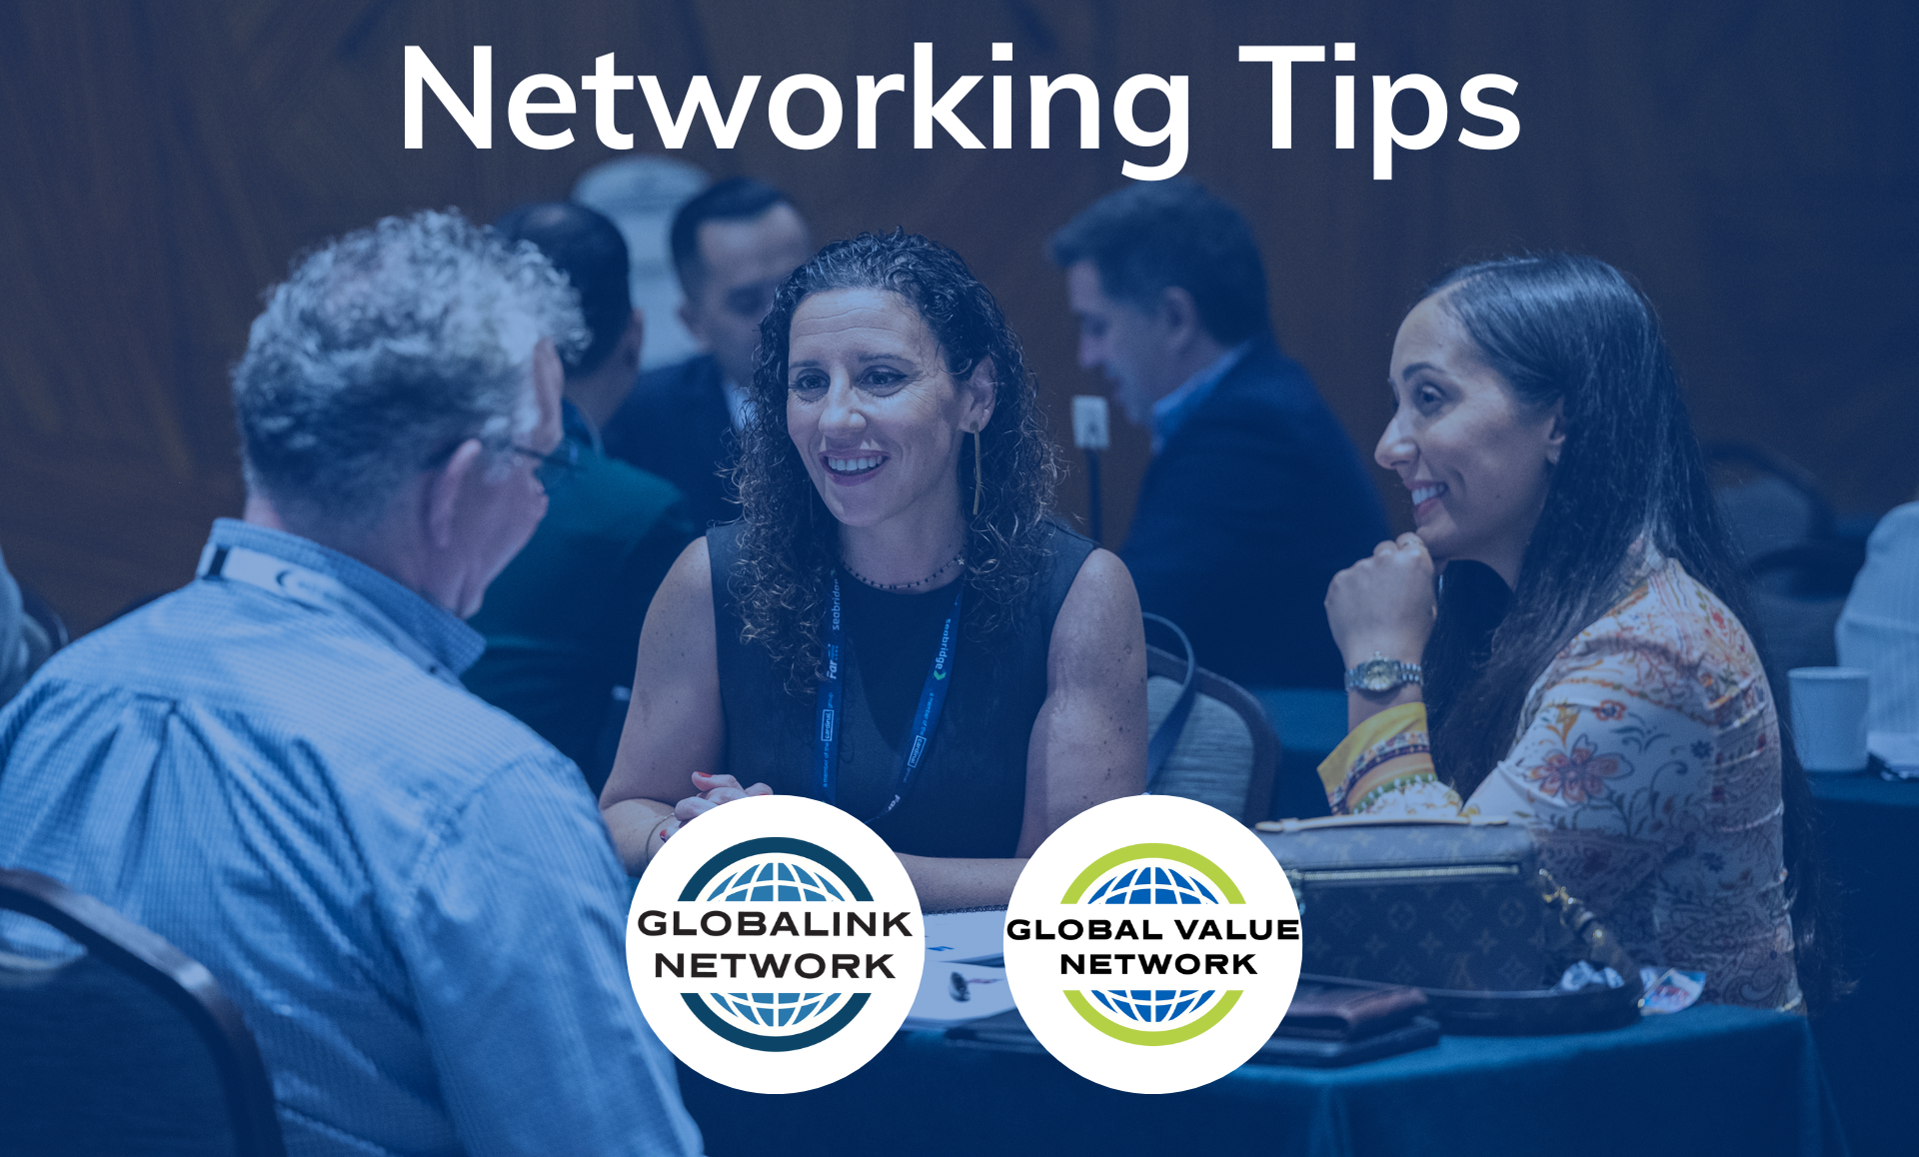 Networking Tips: The Value of Face to Face Meetings